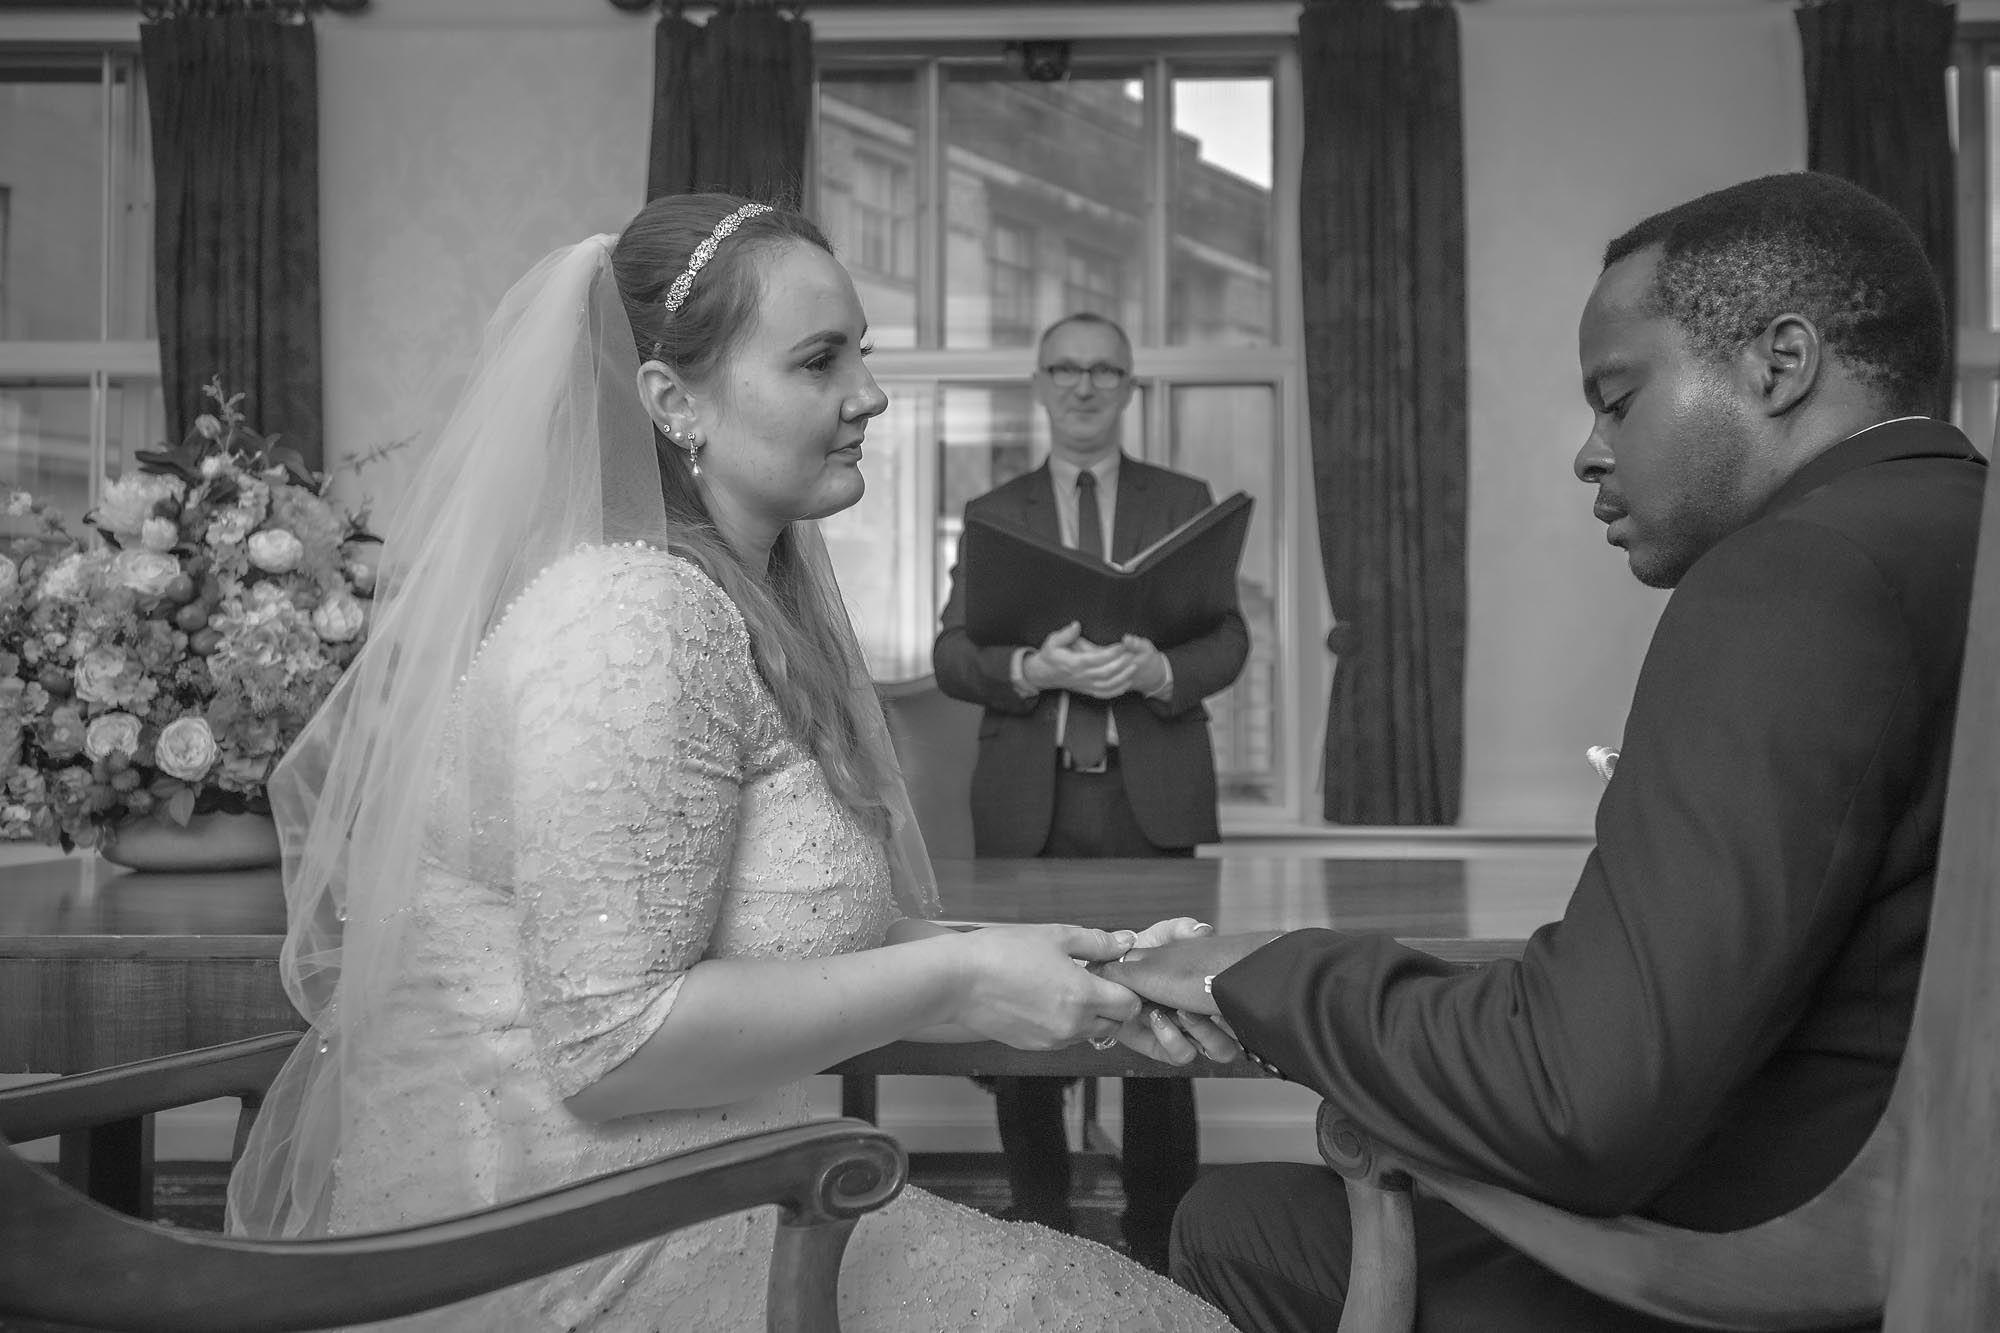 The bride places the ring on her groom's finger at their Wandsworth Town Hall wedding